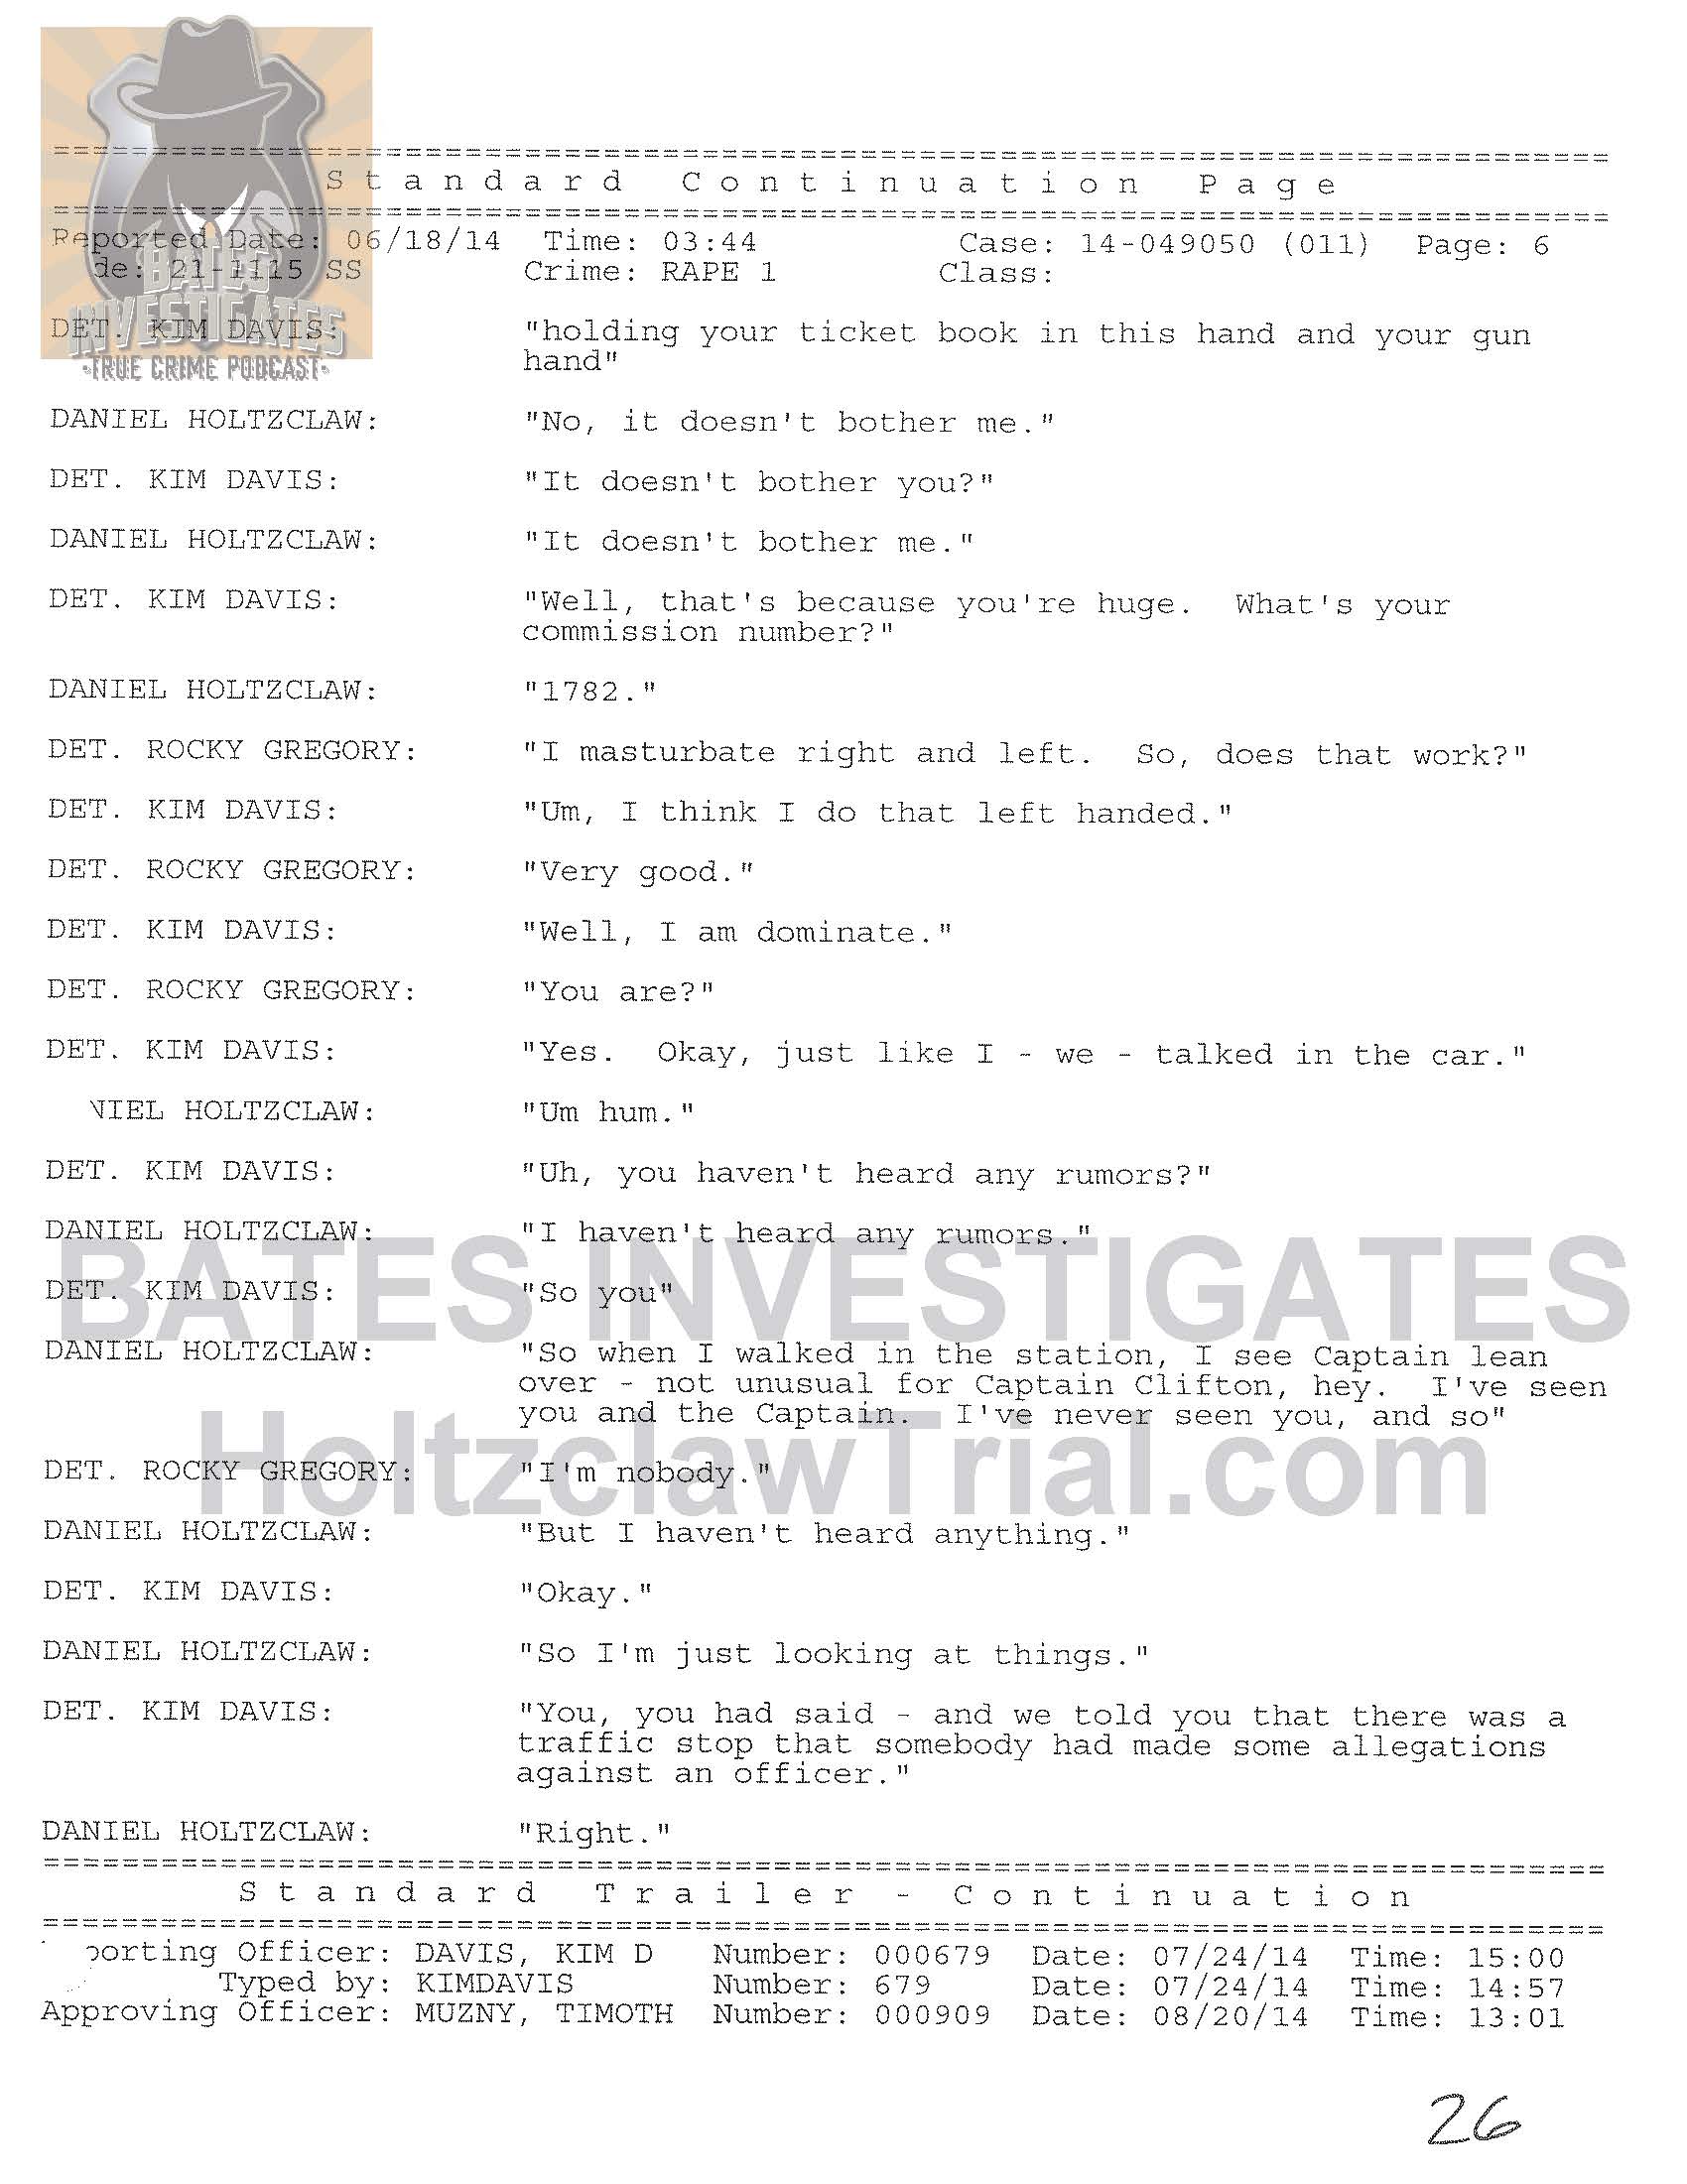 Holtzclaw Interrogation Transcript - Ep02 Redacted_Page_06.jpg